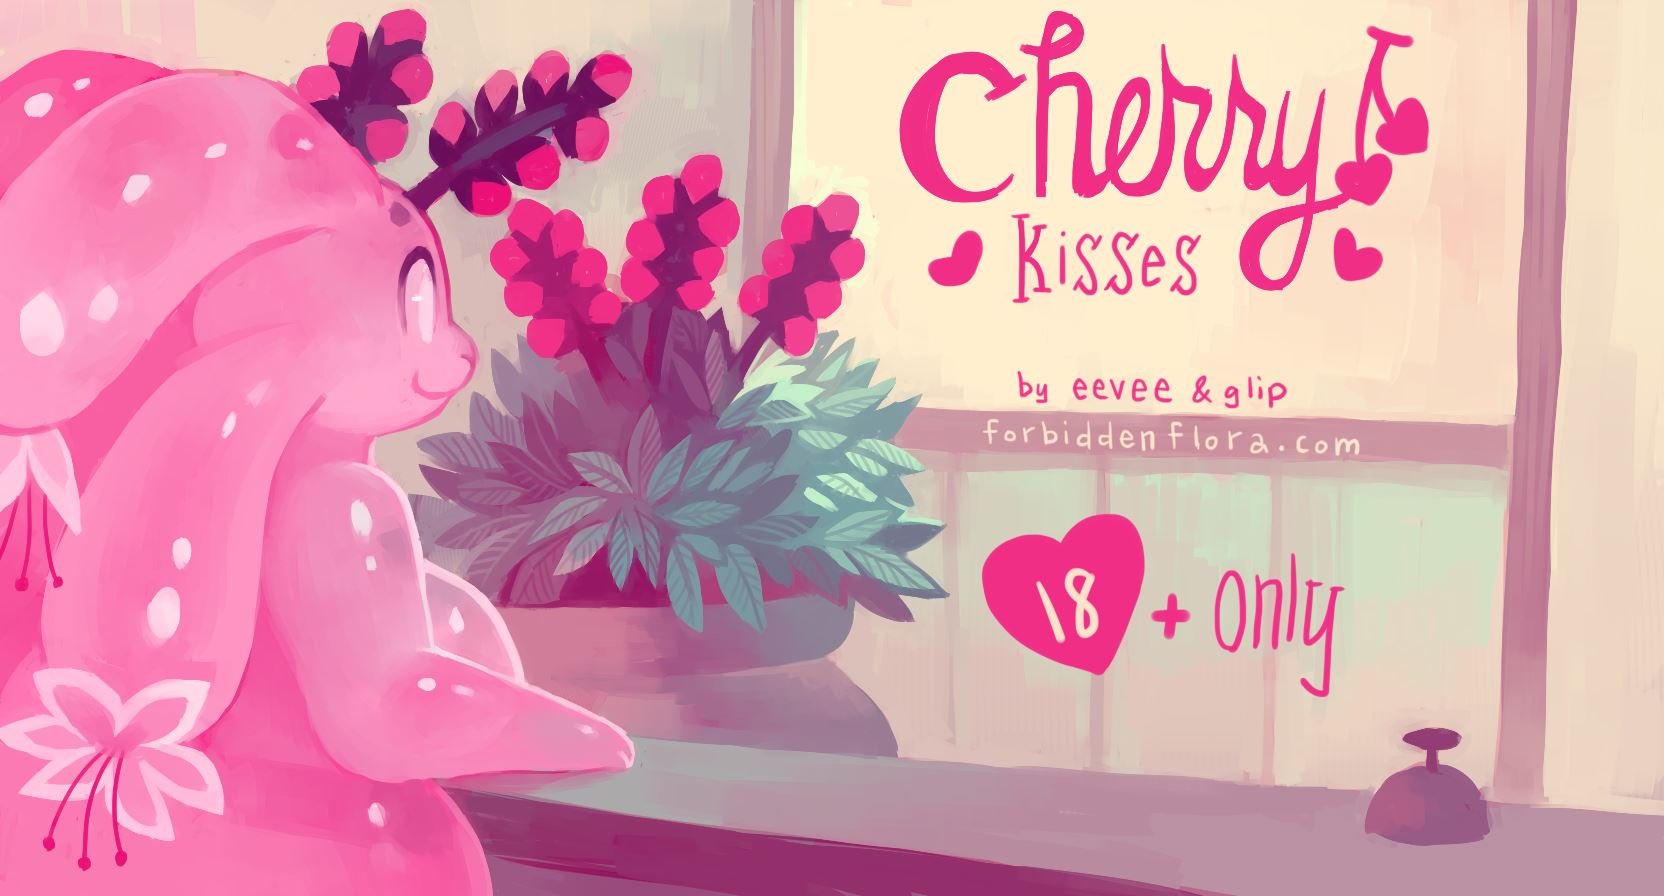 Www Sex Com18 Hours - Cherry Kisses Others Porn Sex Game v.1.0.2 Download for Windows, MacOS,  Linux